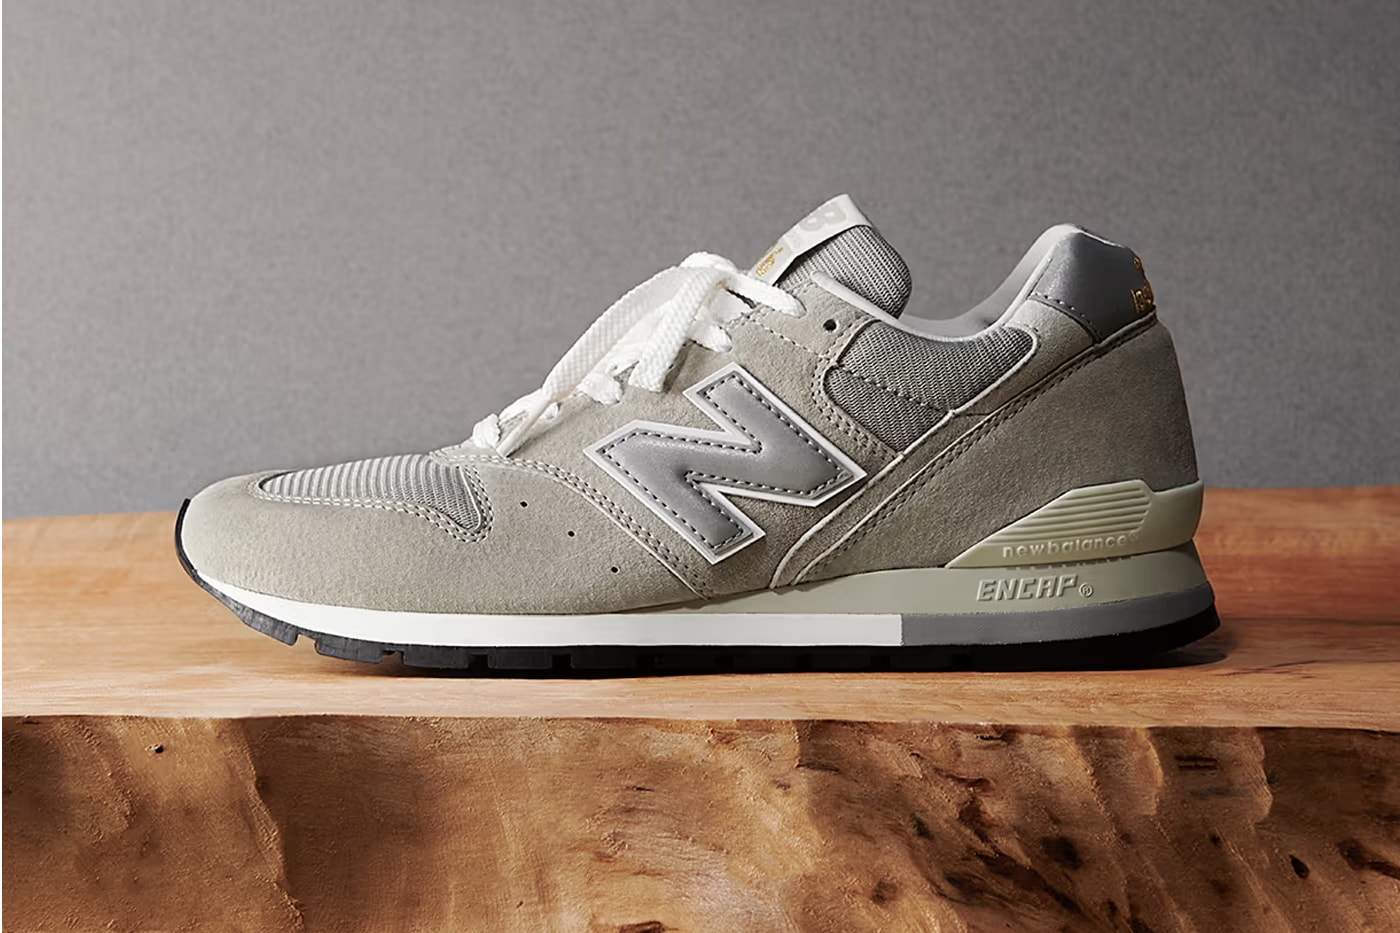 New Balance Keeps It Classic With the M996 Made in Japan "Grey" Colorway M996JP grey white black releasing exclusively japan